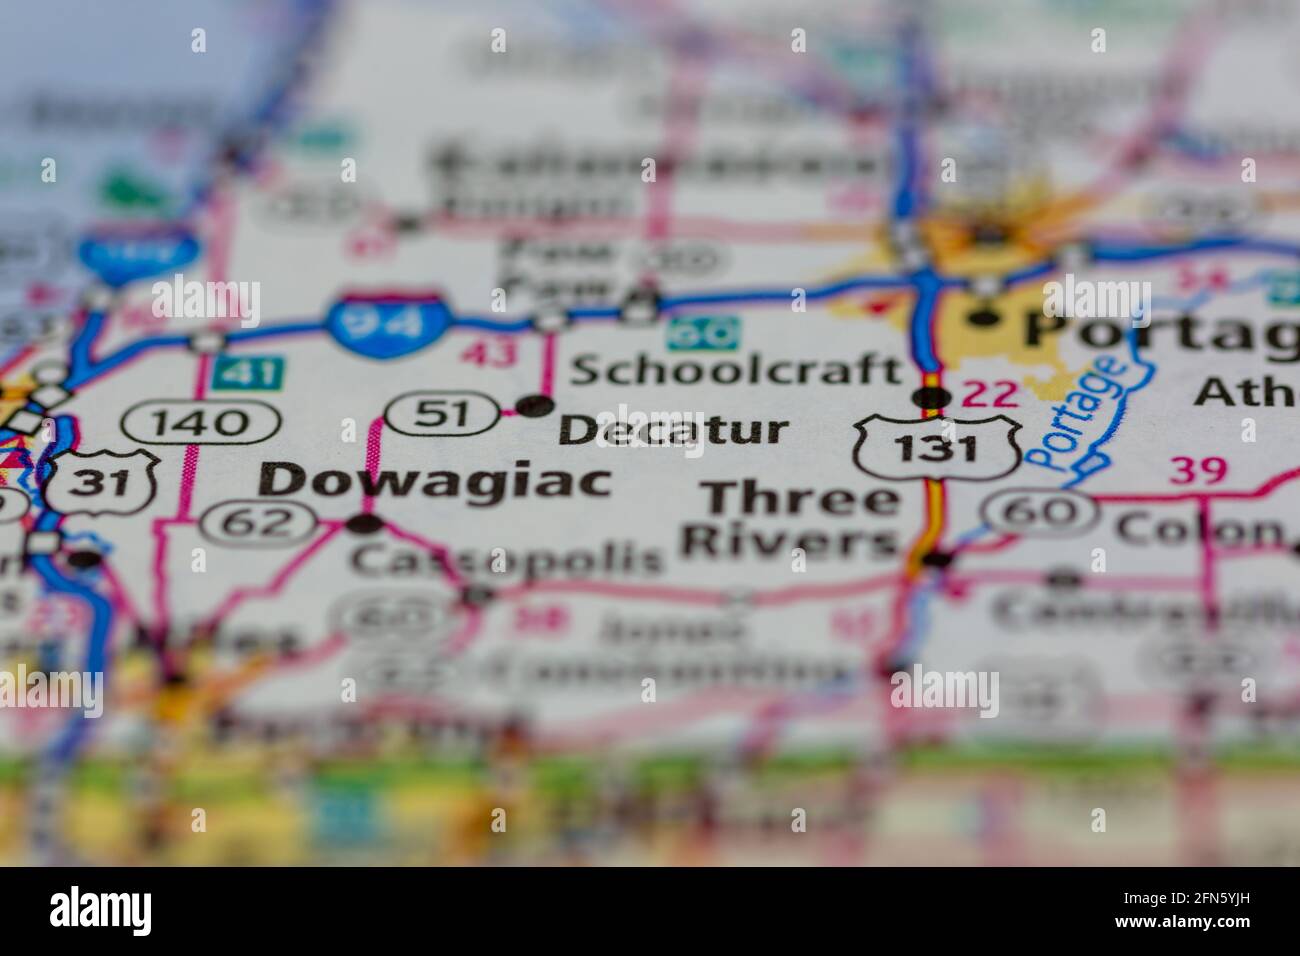 Decatur Michigan USA shown on a Geography map or road map Stock Photo